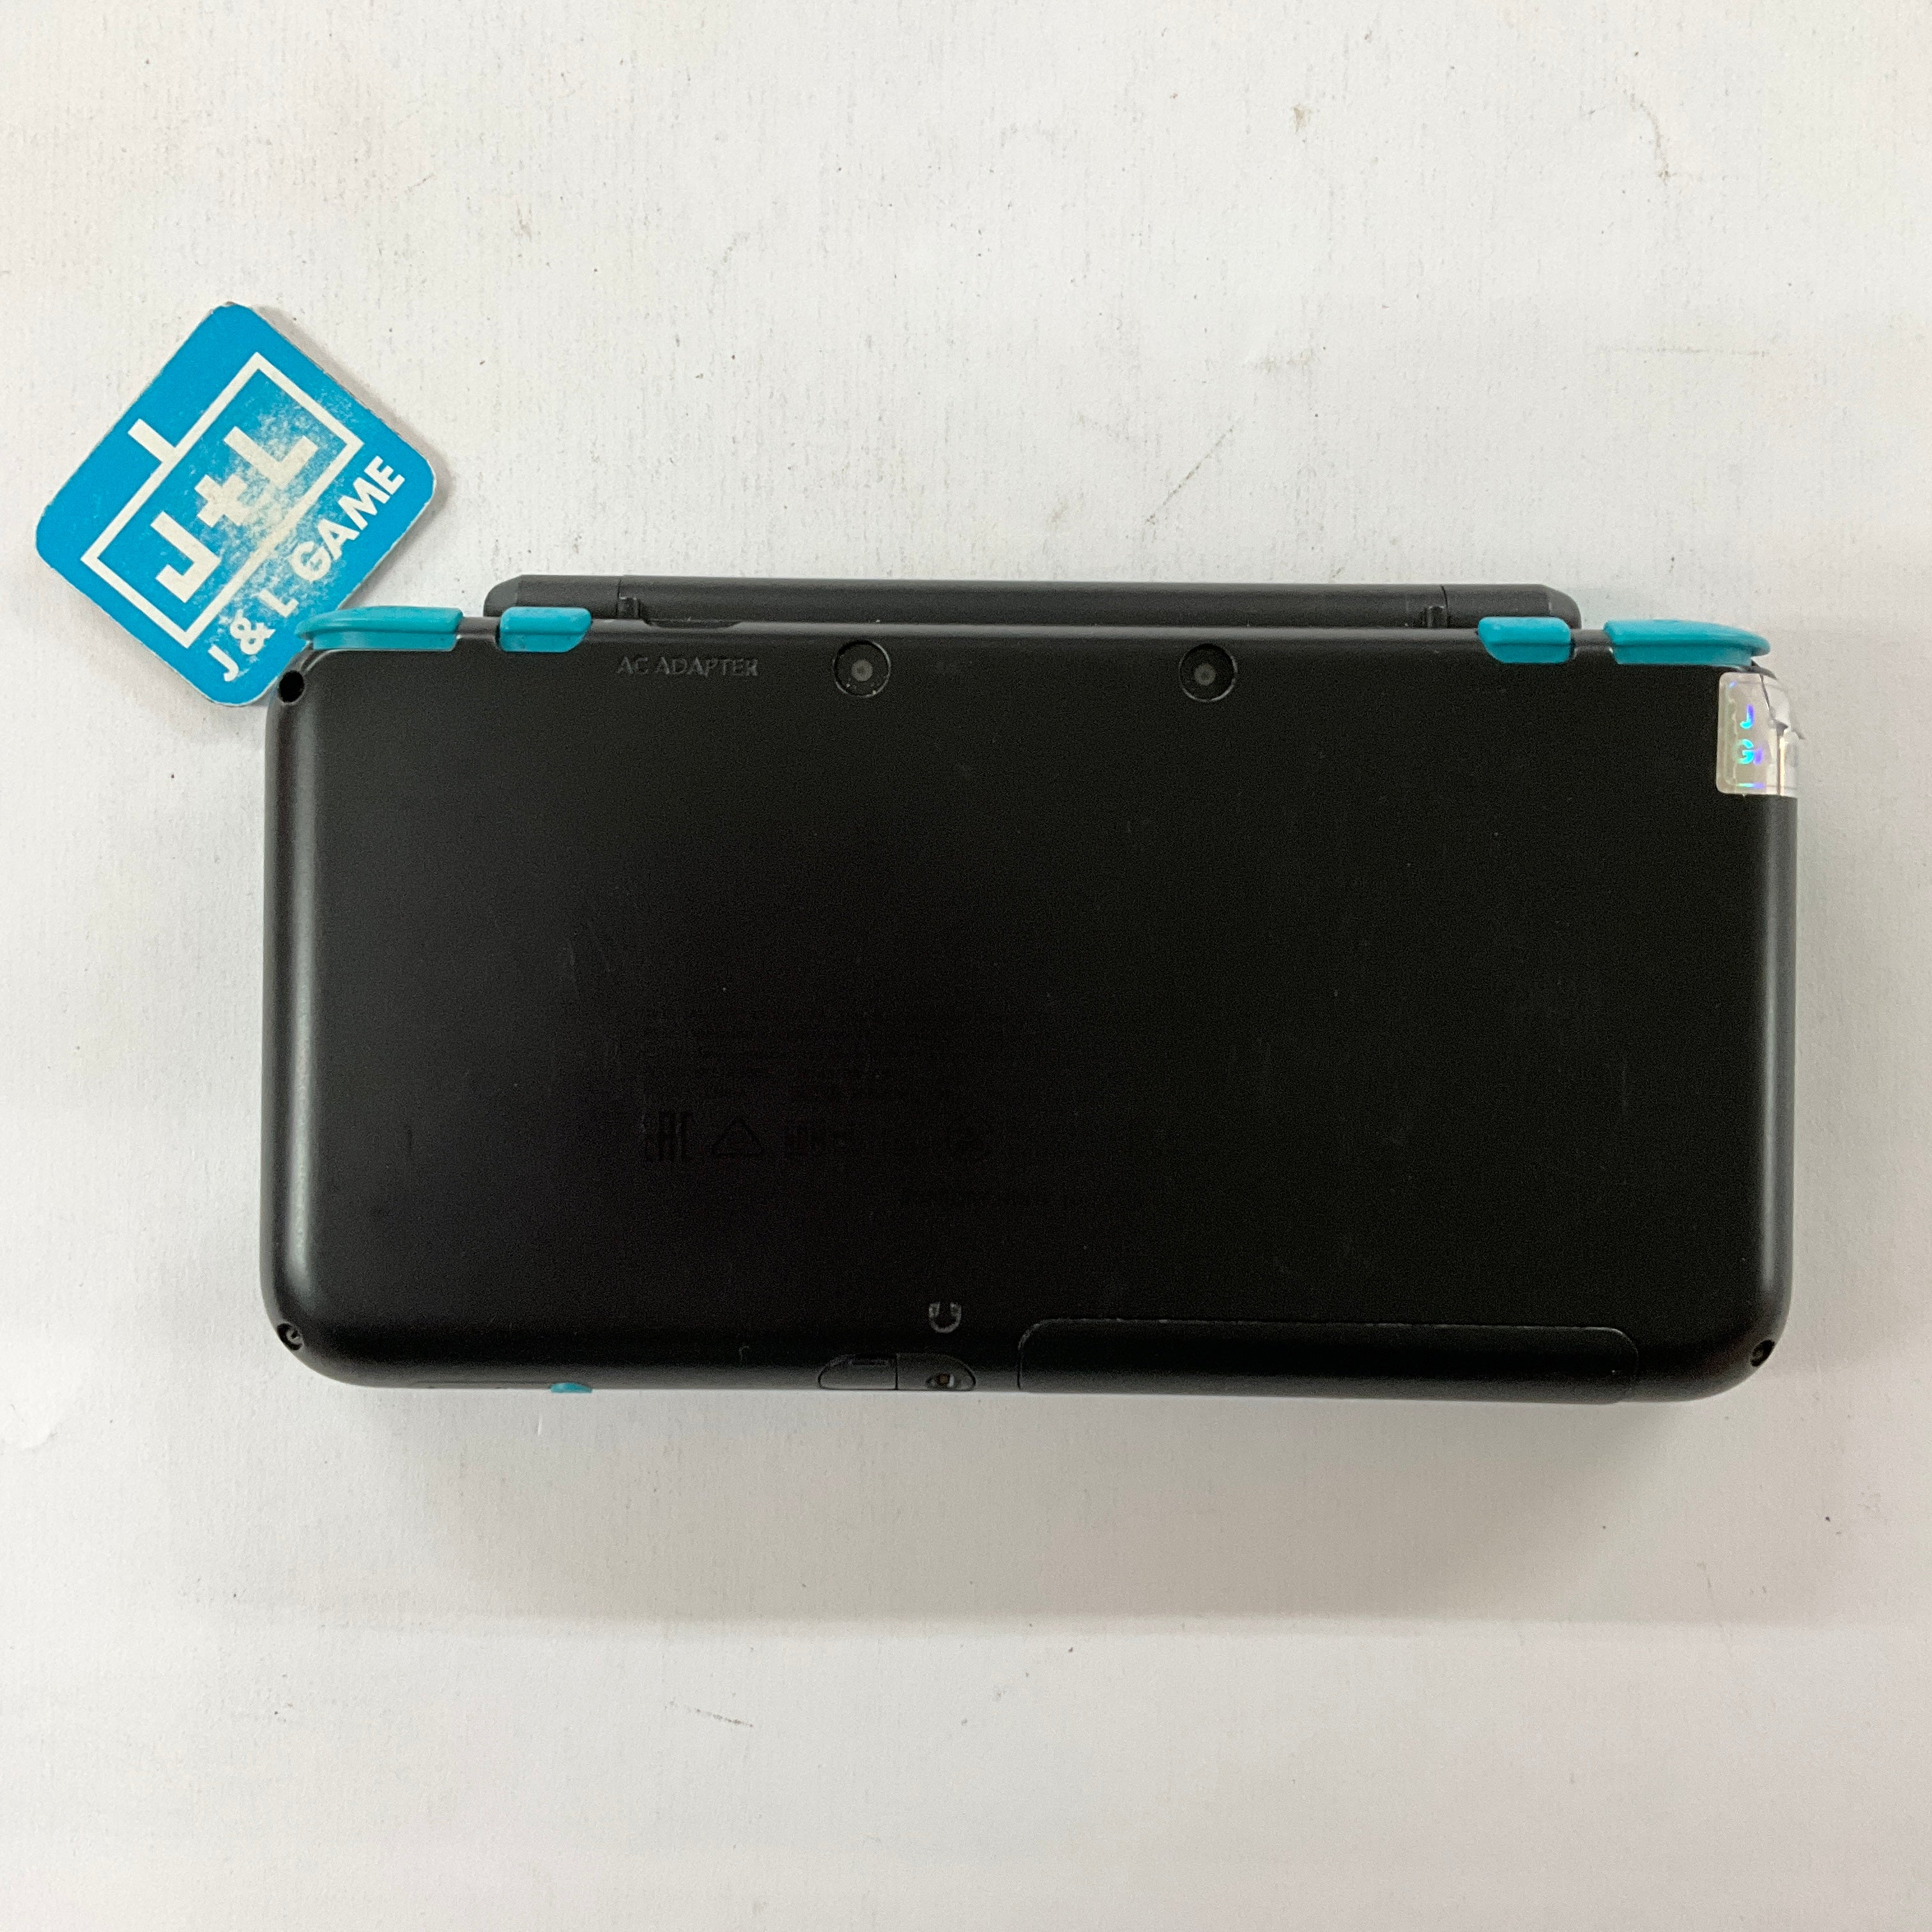 Nintendo New 2DS XL Console (Black + Turquoise) - Nintendo 3DS [Pre-Owned] Consoles Nintendo   